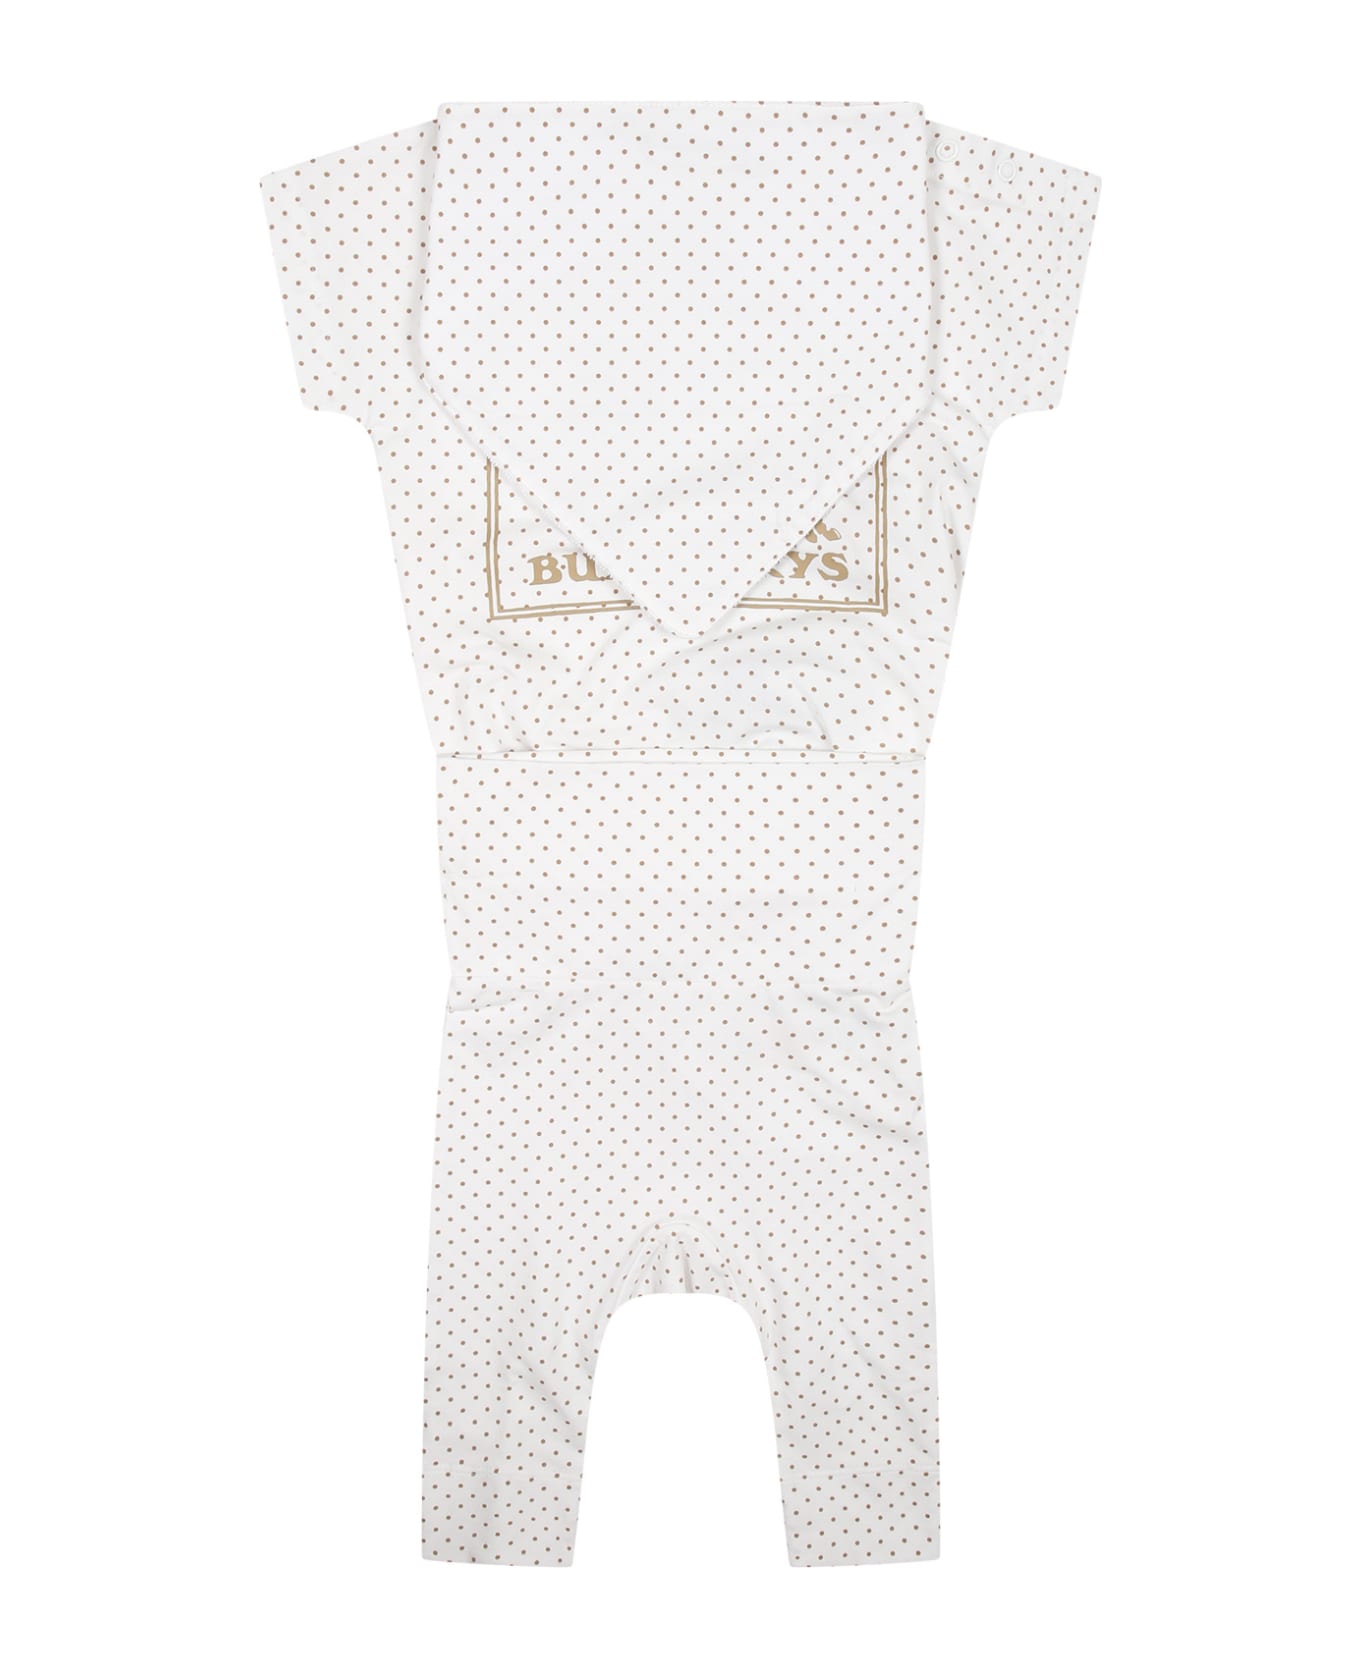 Burberry White Babies Outfit With All-over Logo And Polka Dots - White ボトムス